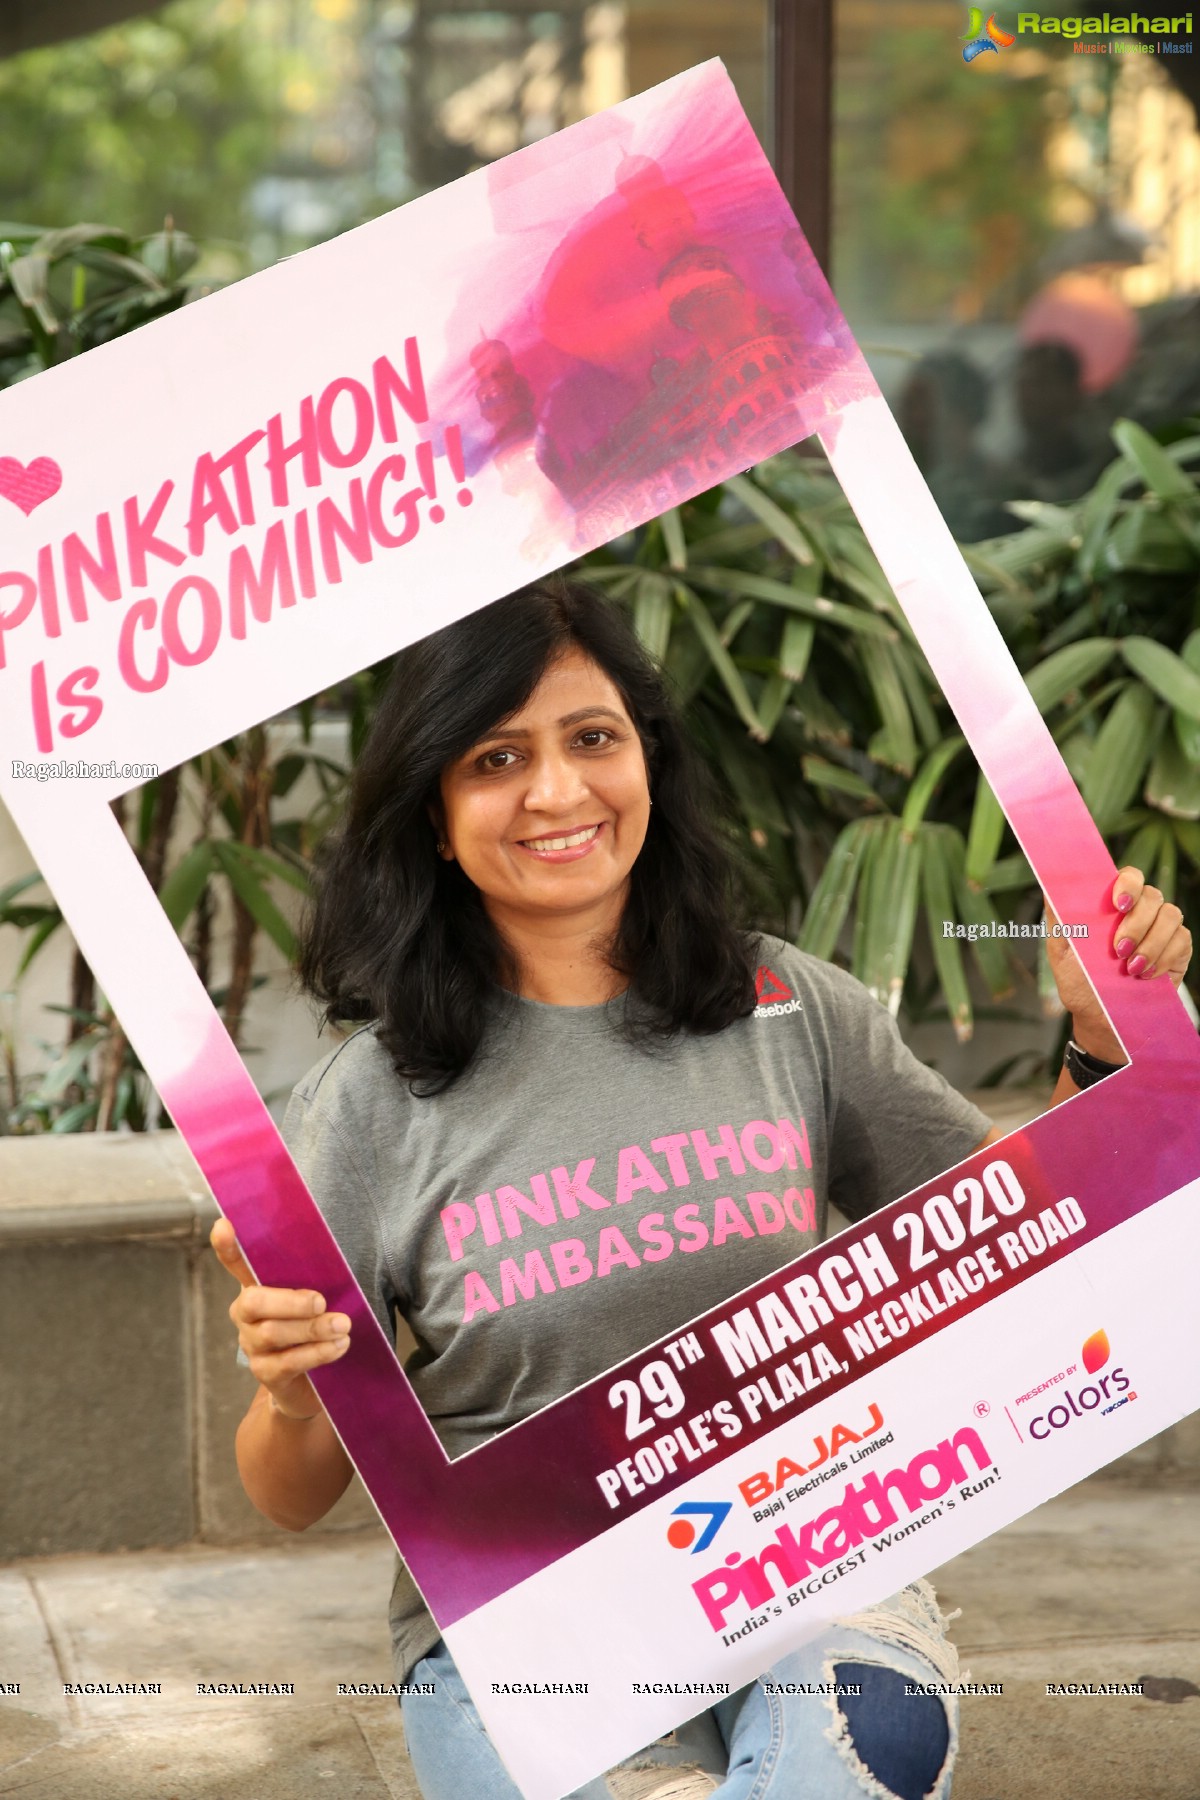 Bajaj Electricals Pinkathon Hyderabad 2020 Presented by Colors Announced